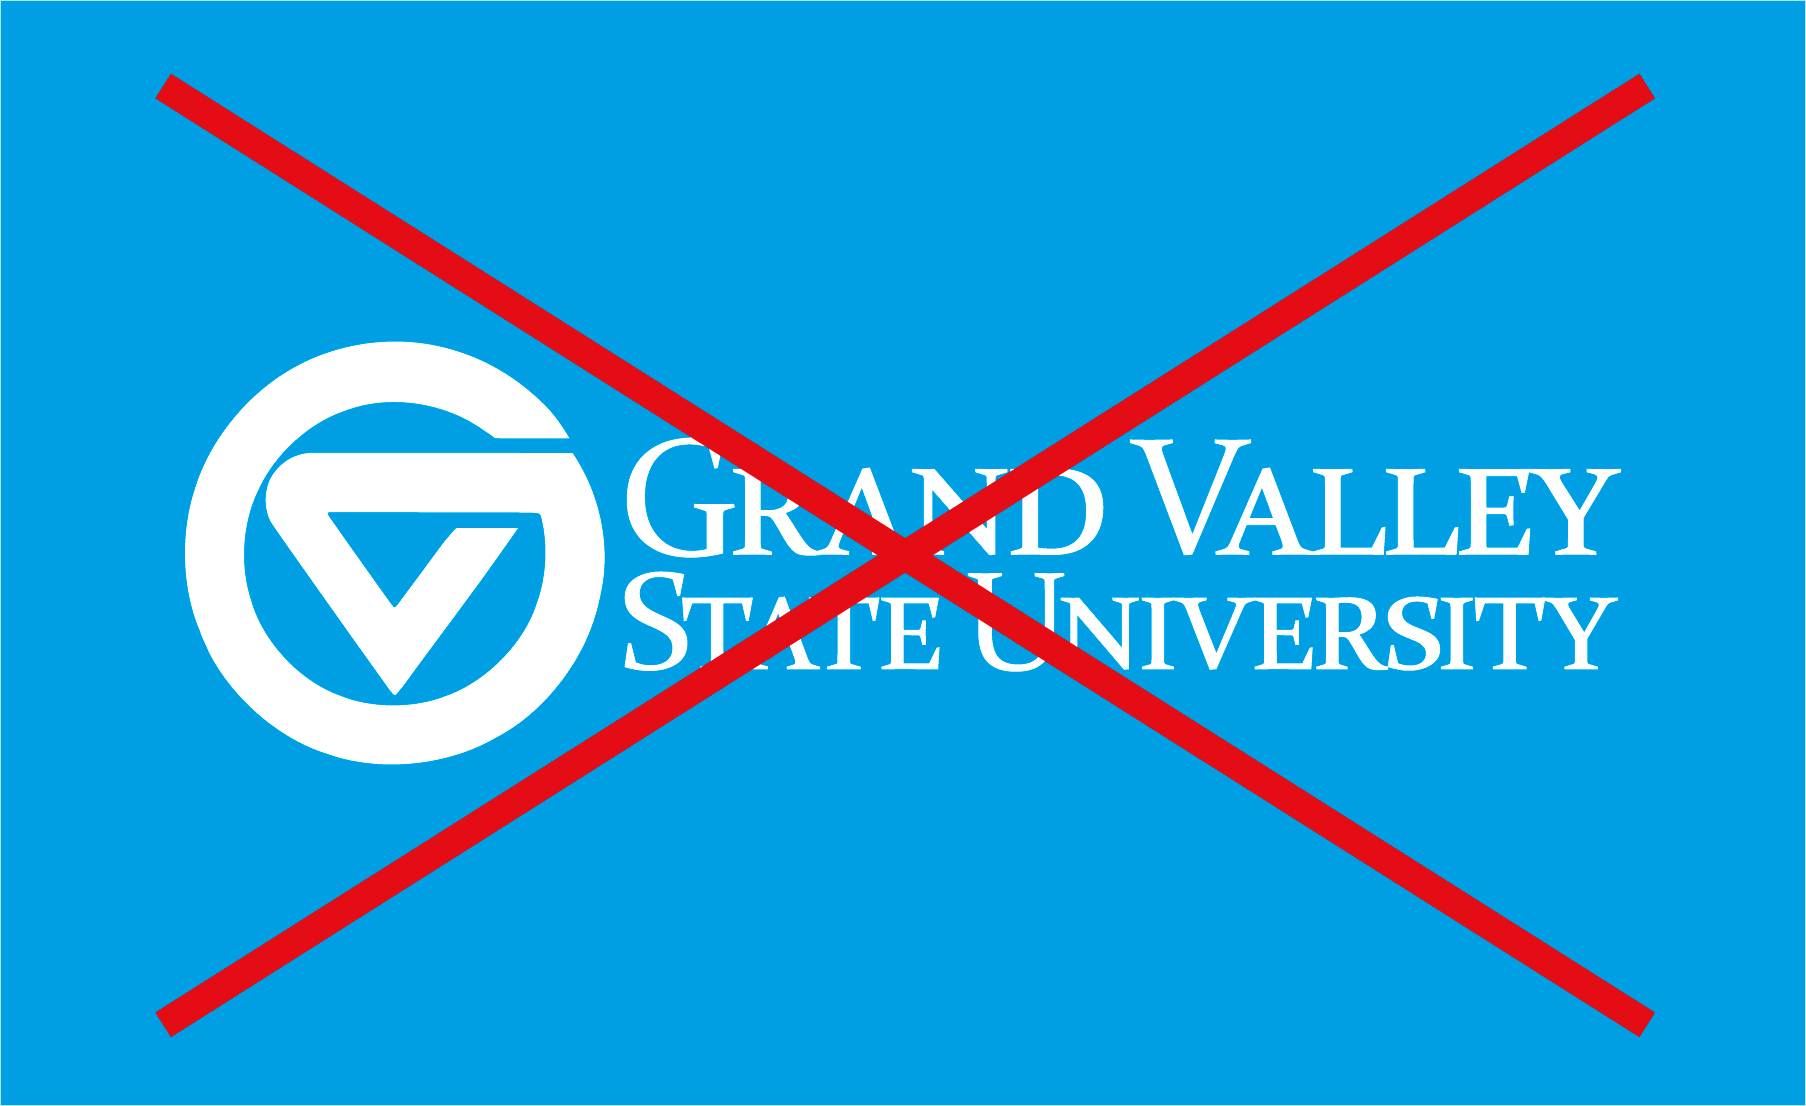 The circle-G logomark next to the words "Grand Valley State University" in a font that looks similar to the logotype artwork. A red X overlays the image.